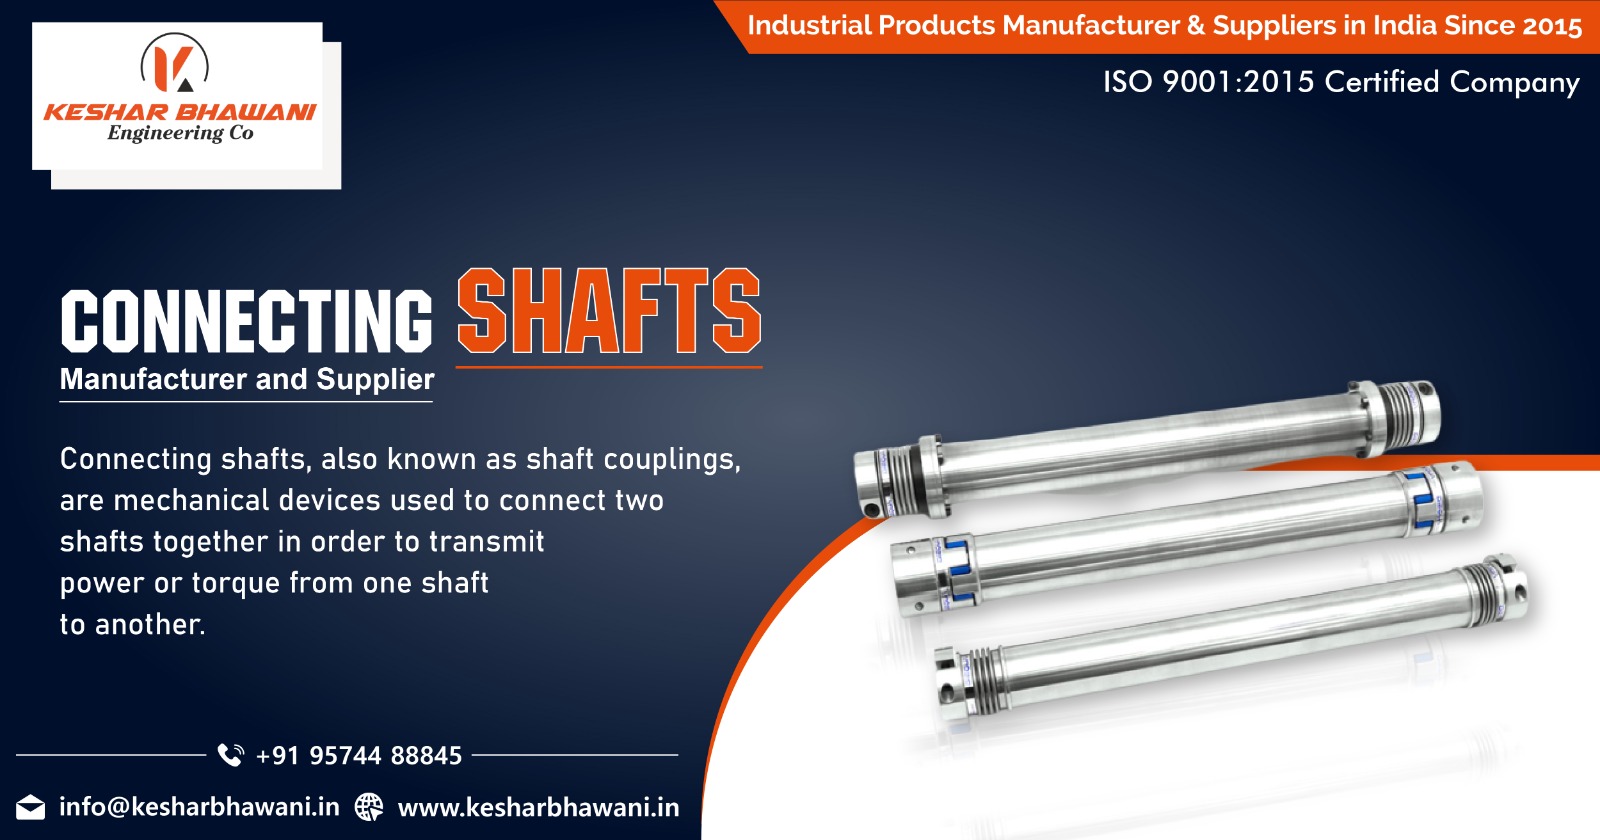 Supplier of Connecting Shafts in India